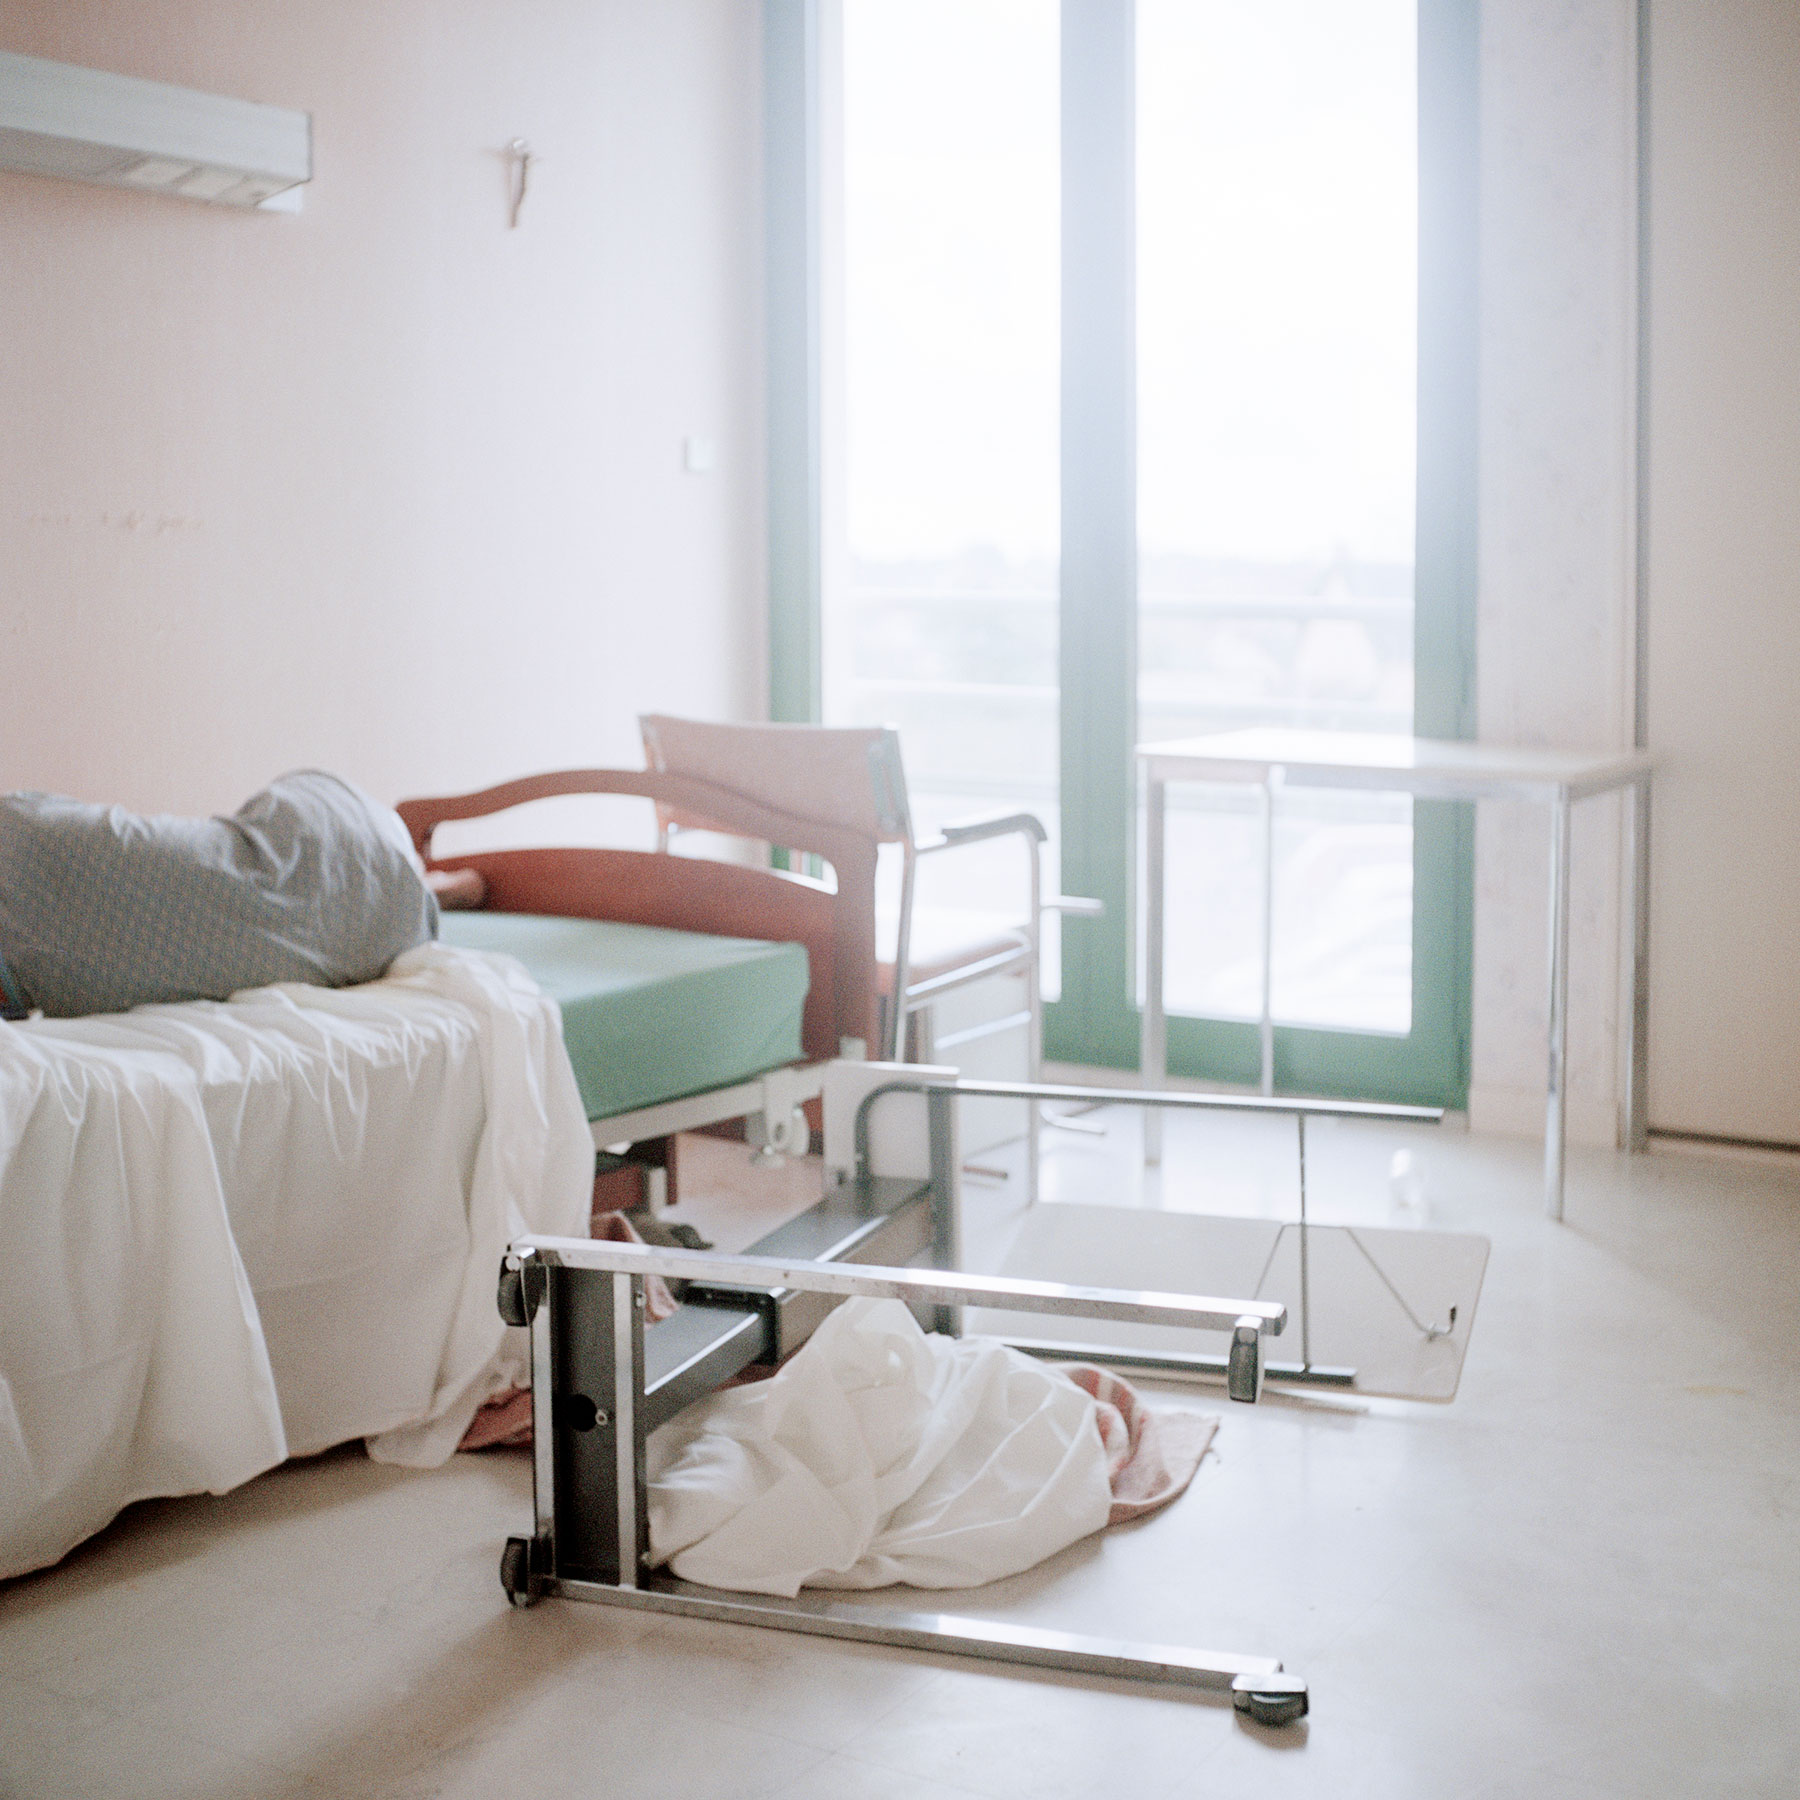  Seven A.M. in a resident’s room after a long night in the ward. Alzheimer’s disease can cause behaviour difficulties such as aggressiveness, eating disorders, increased anxiety or depressive tendencies. 